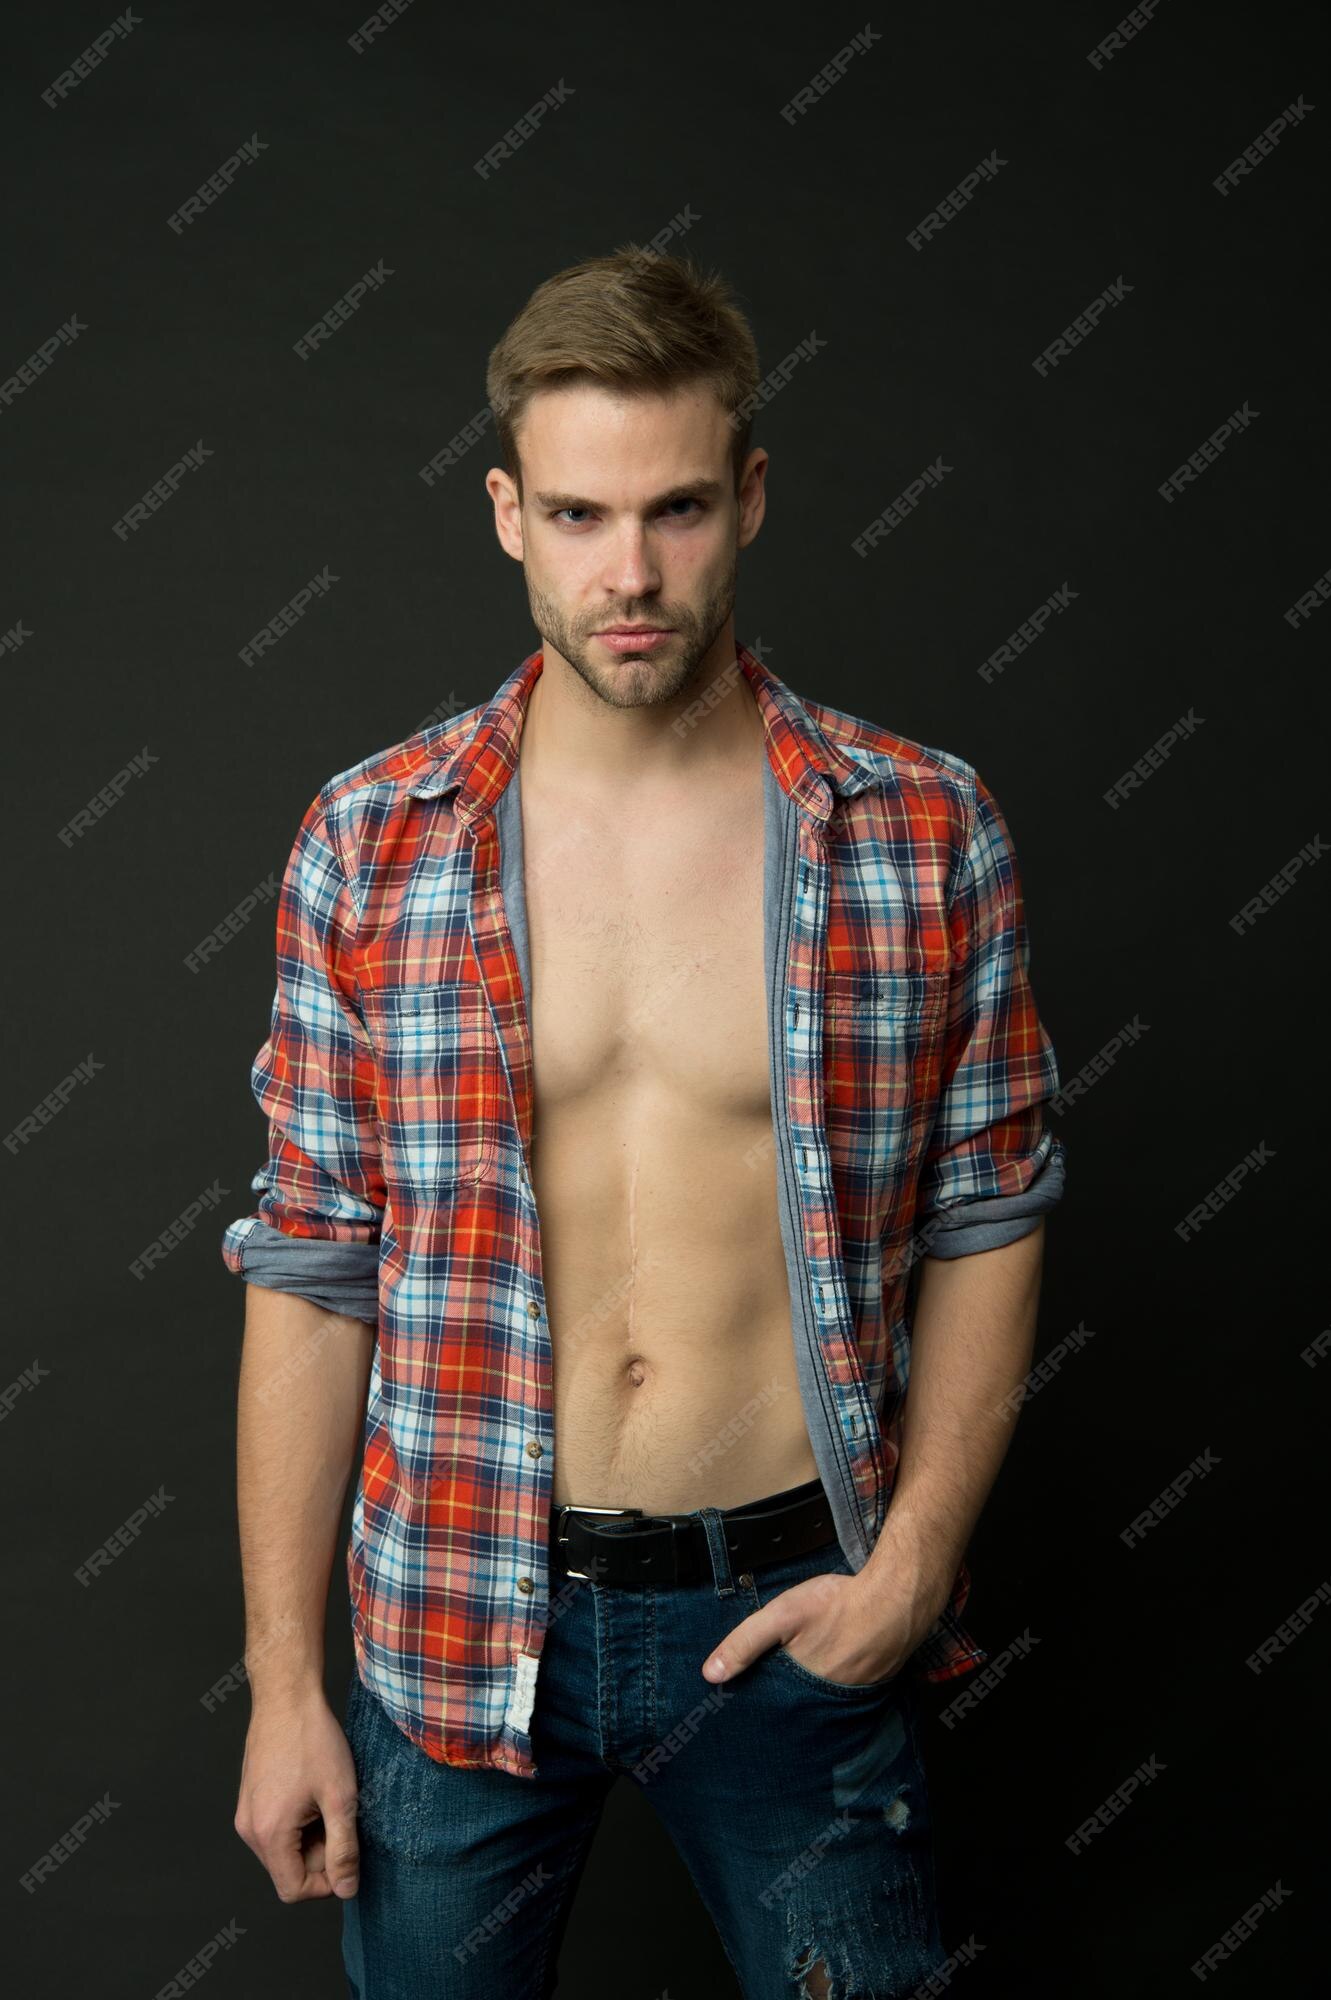 Premium Photo | Man looking his best man on dark background handsome man with bare torso caucasian guy with beard and stylish hair sexy man casual style fashion style